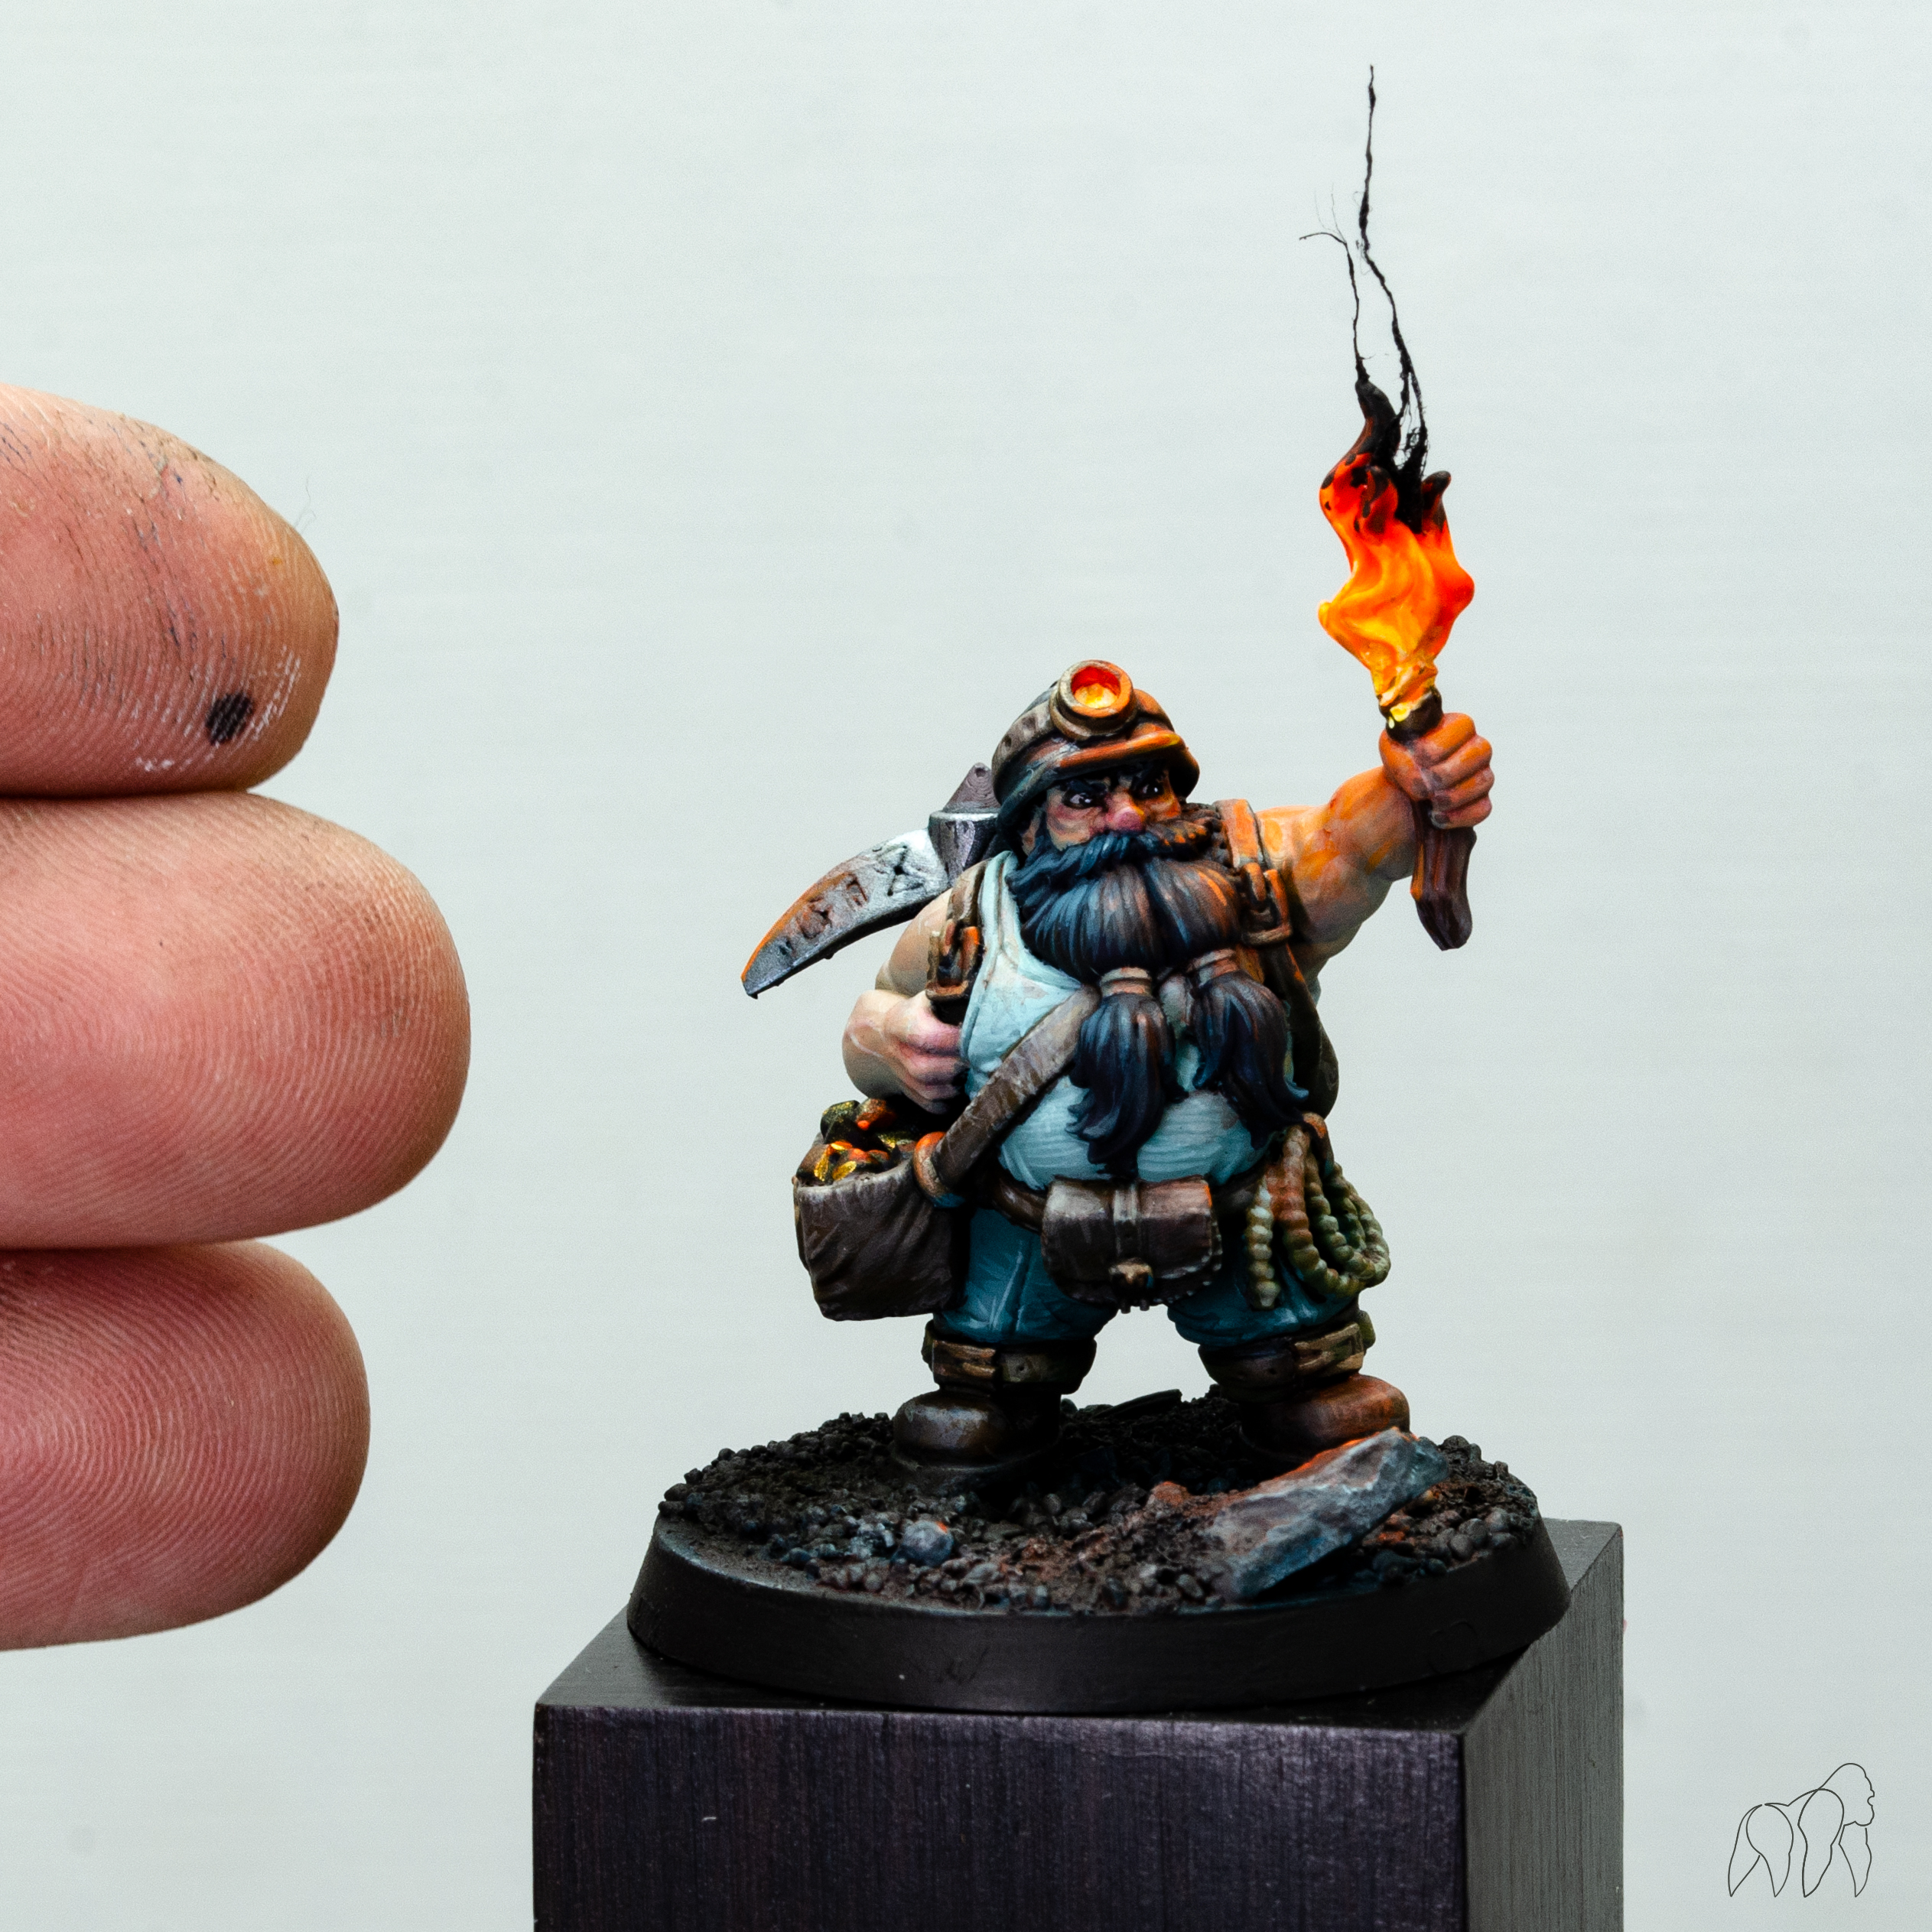 MASSIVE VOODOO: Review: NMM Masterclass with Tamer Widerspan